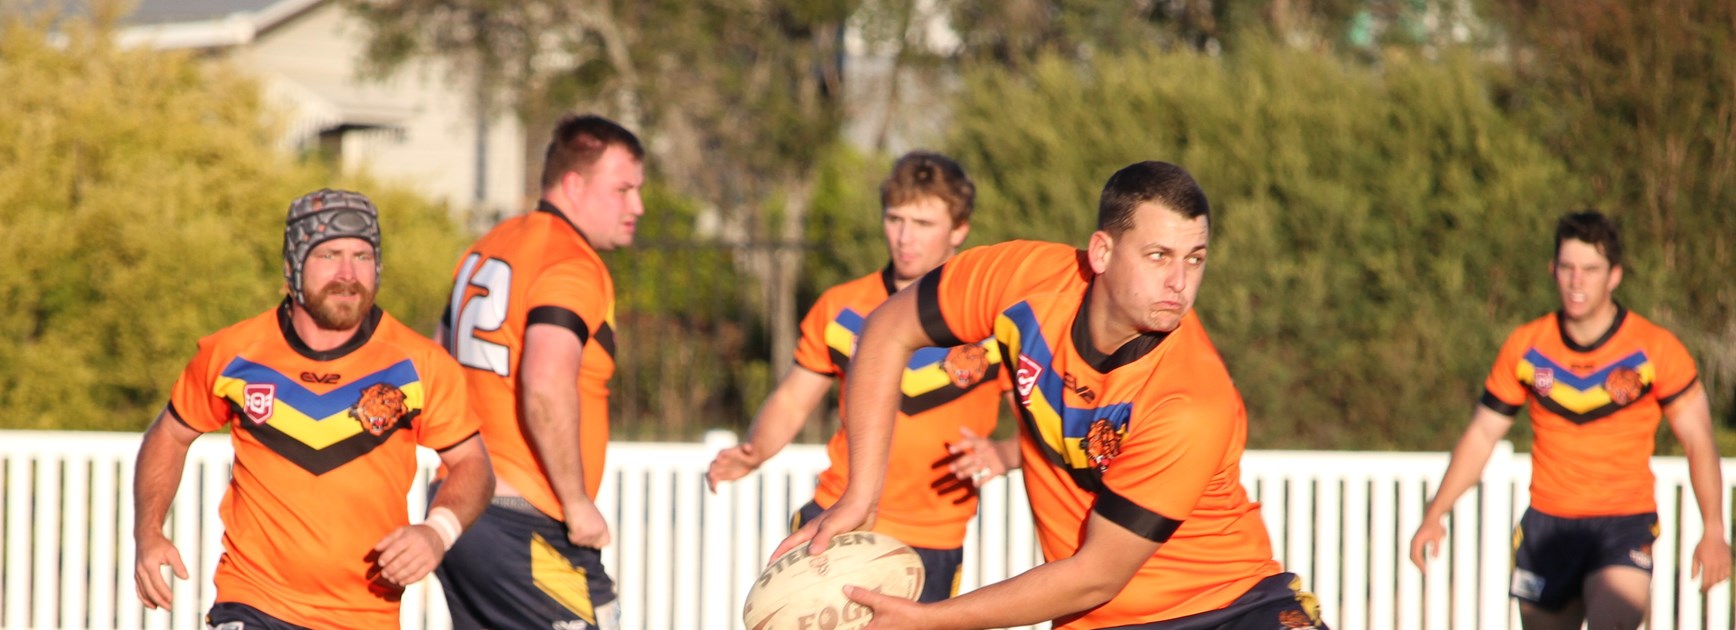 A grade preview: Finals calculations for Bundaberg and Toowoomba